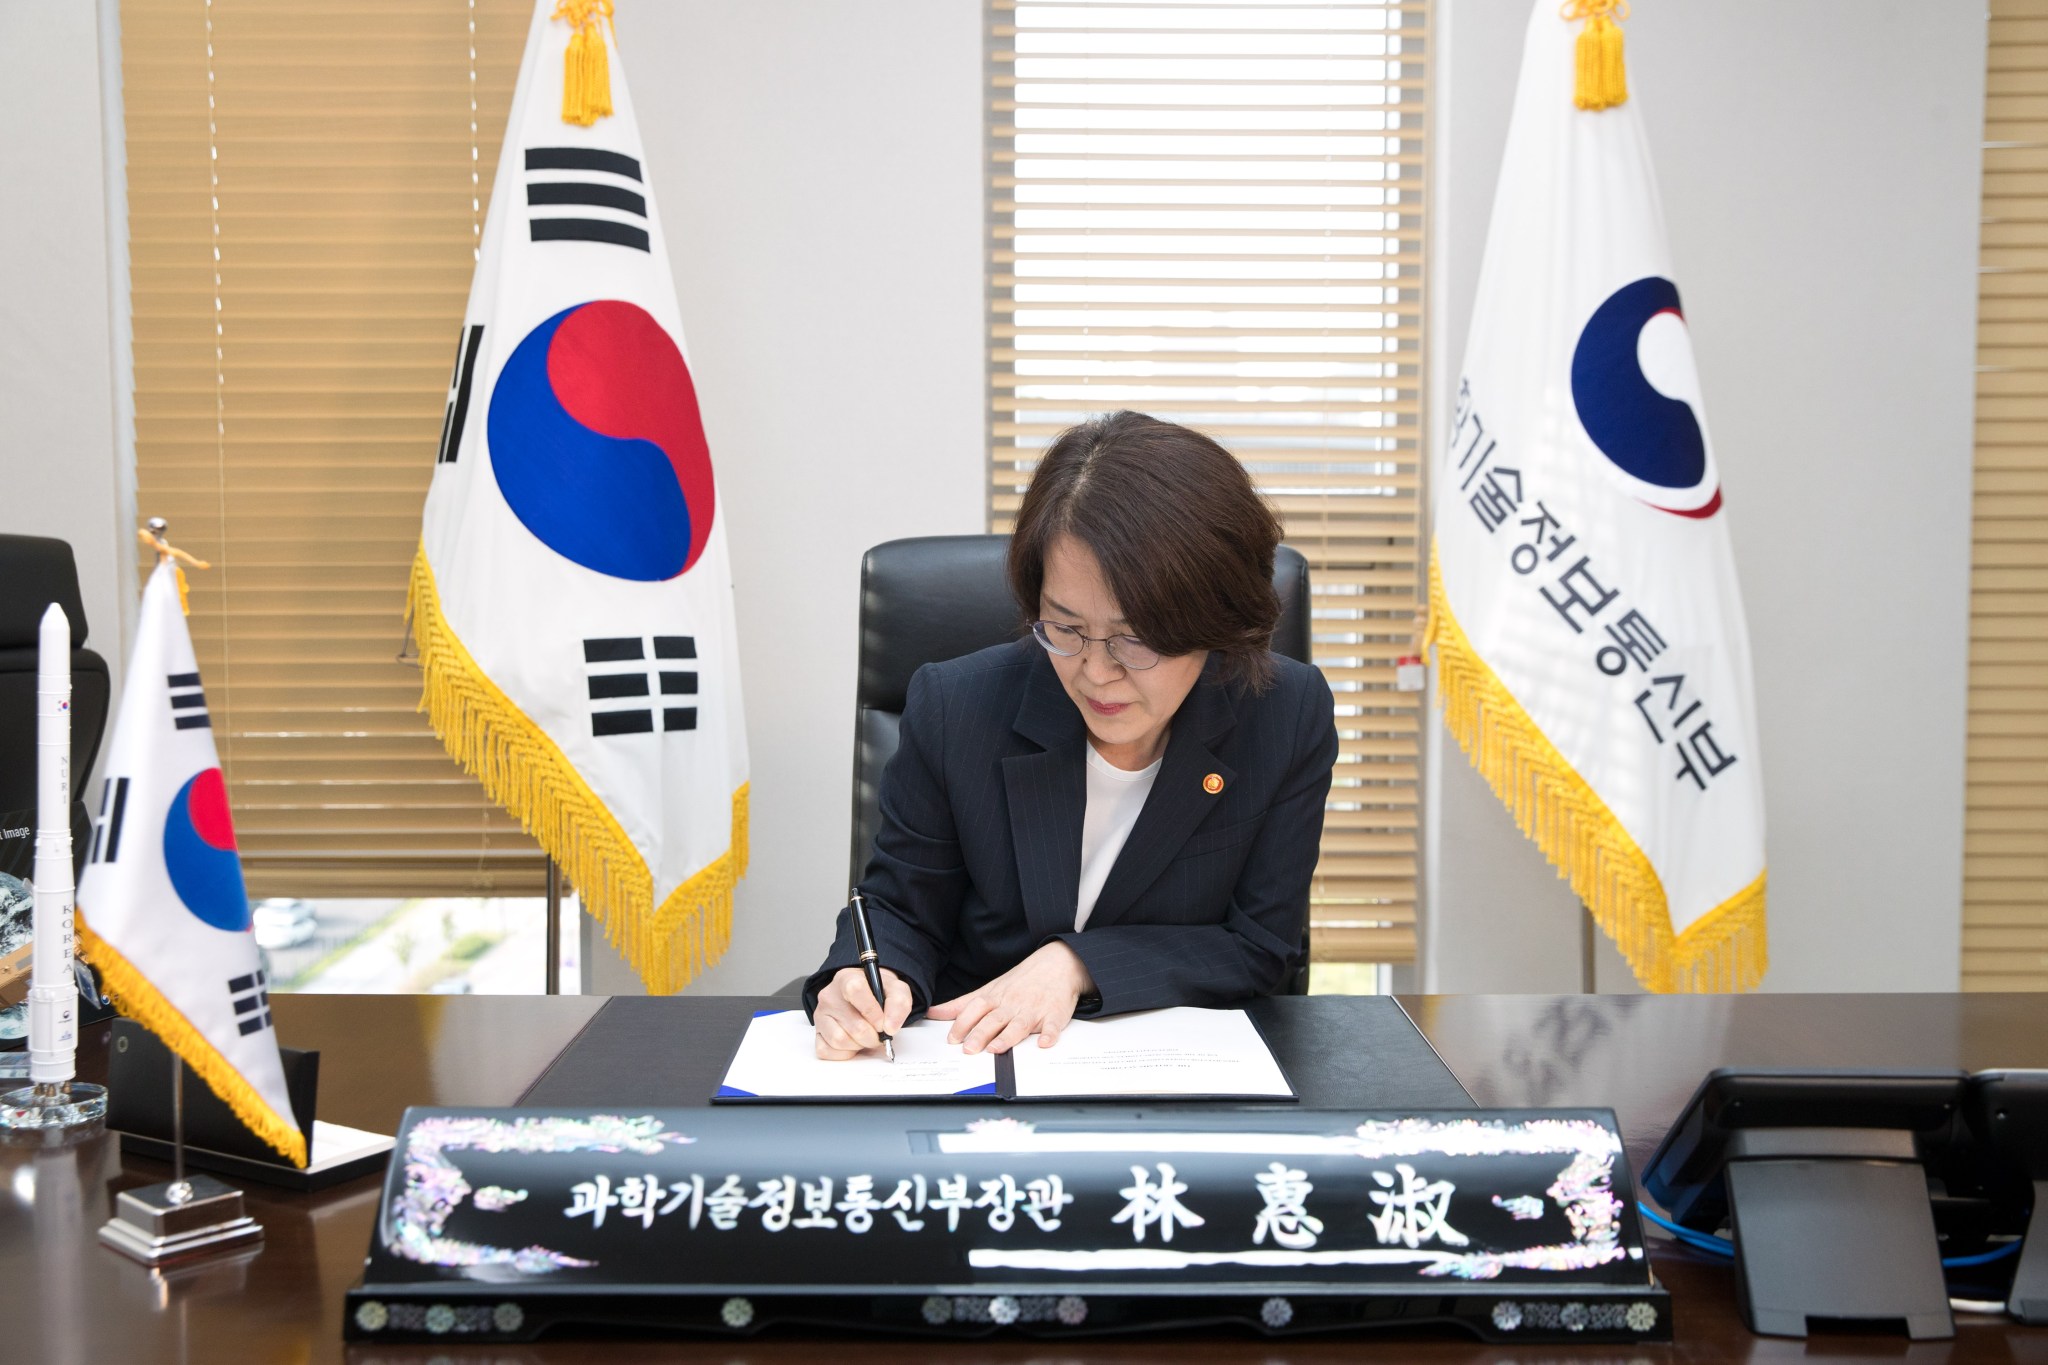 Republic of Korea (ROK) Minister of Science and ICT Lim Hyesook signs the Artemis Accords during a ceremony May 24 in Seoul.